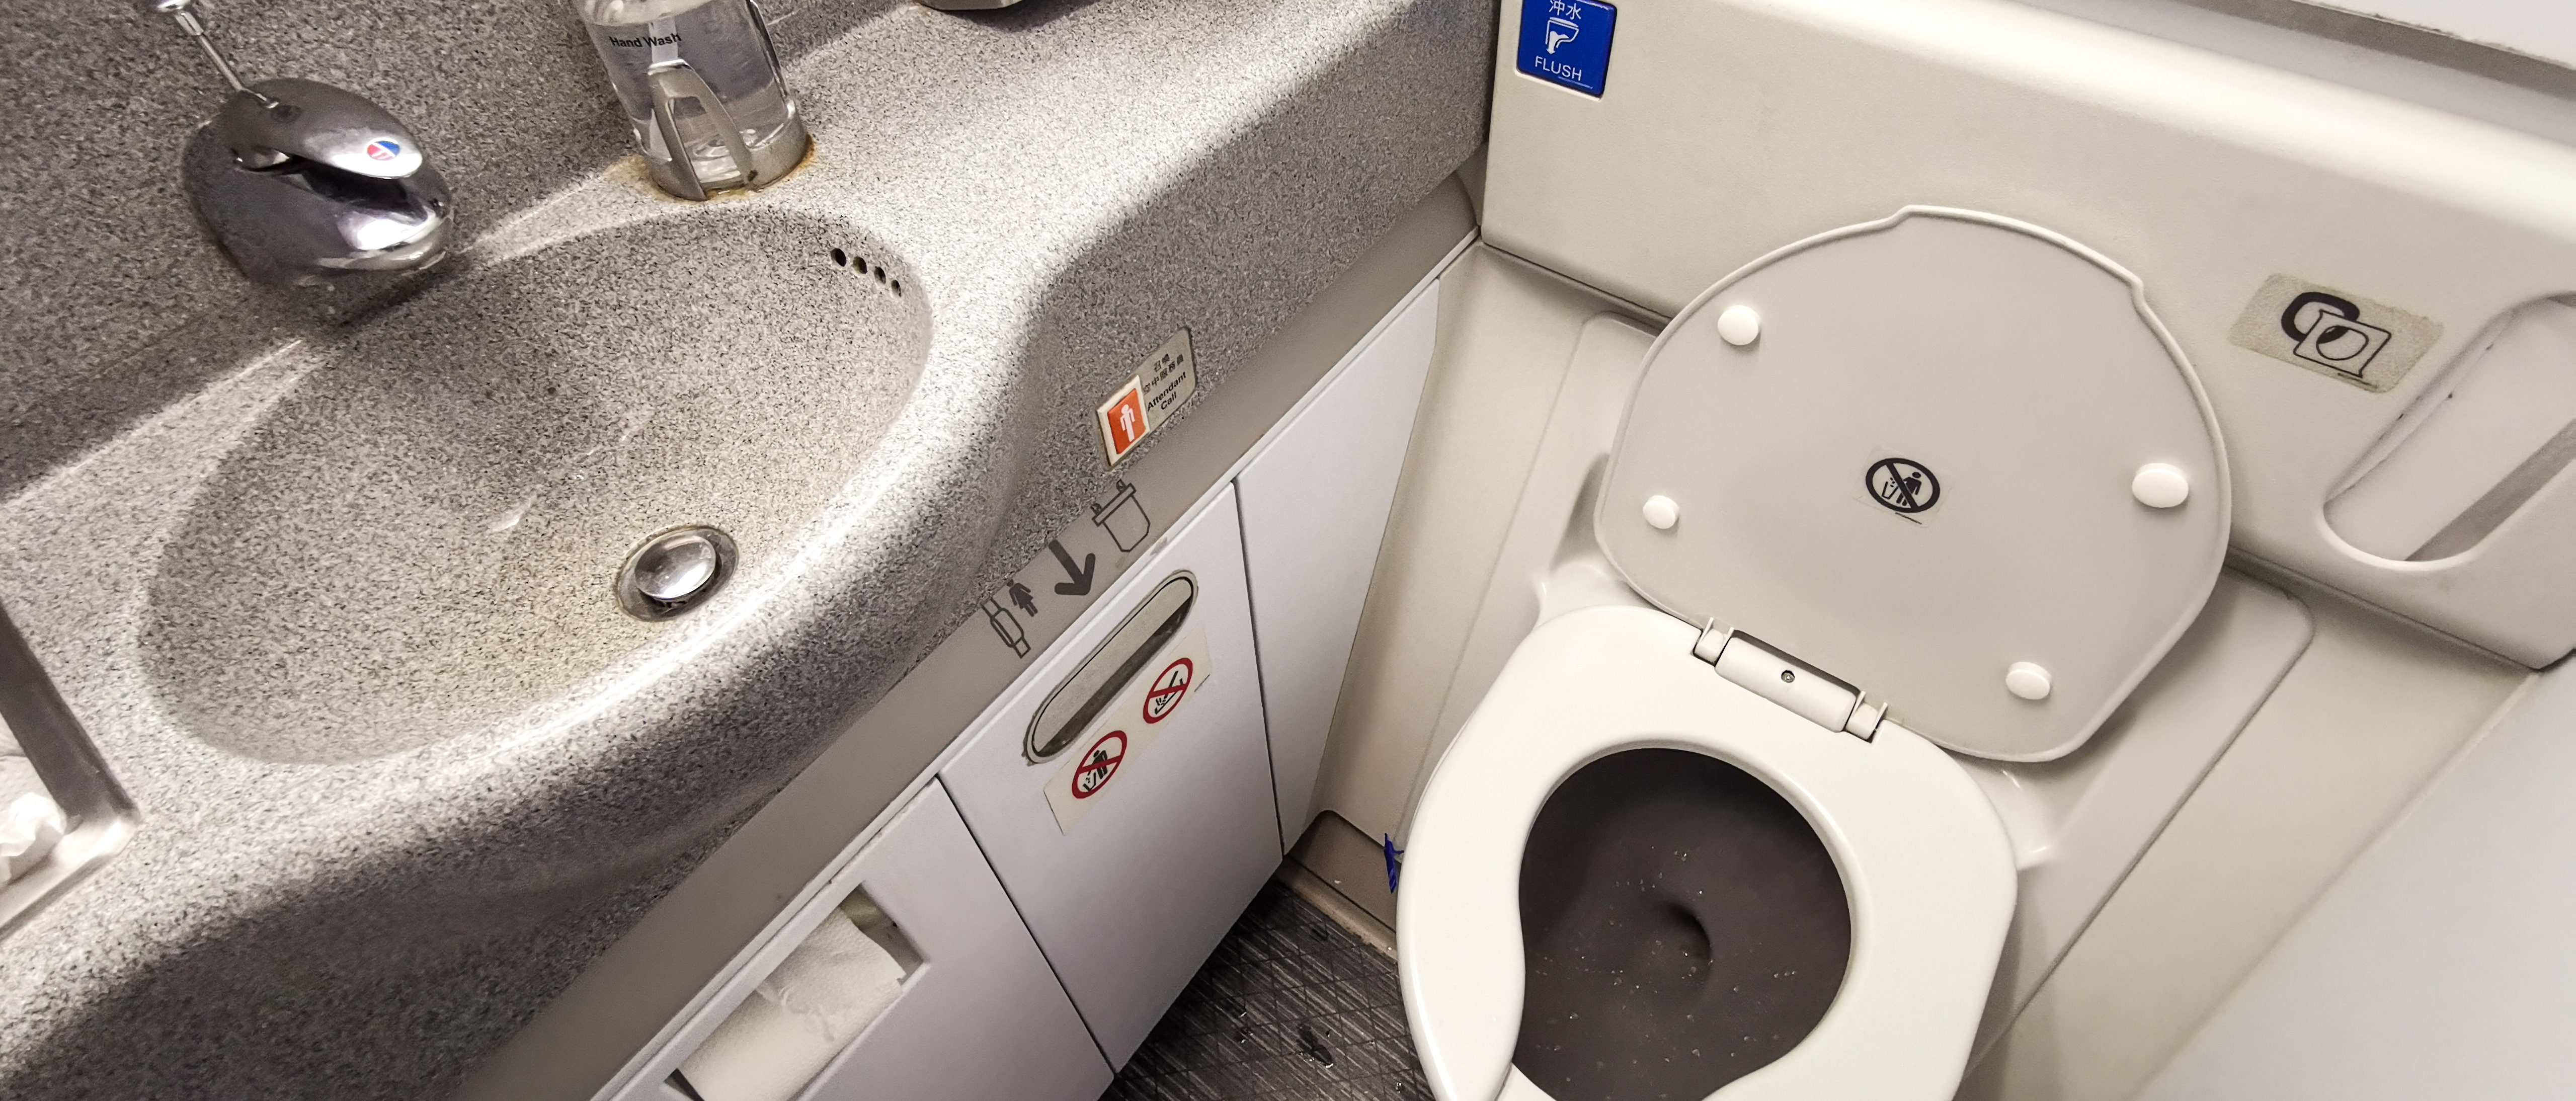 A Cleaning Crew Discovered An Abandoned Fetus Shoved In The Plane S Toilet The Daily Caller